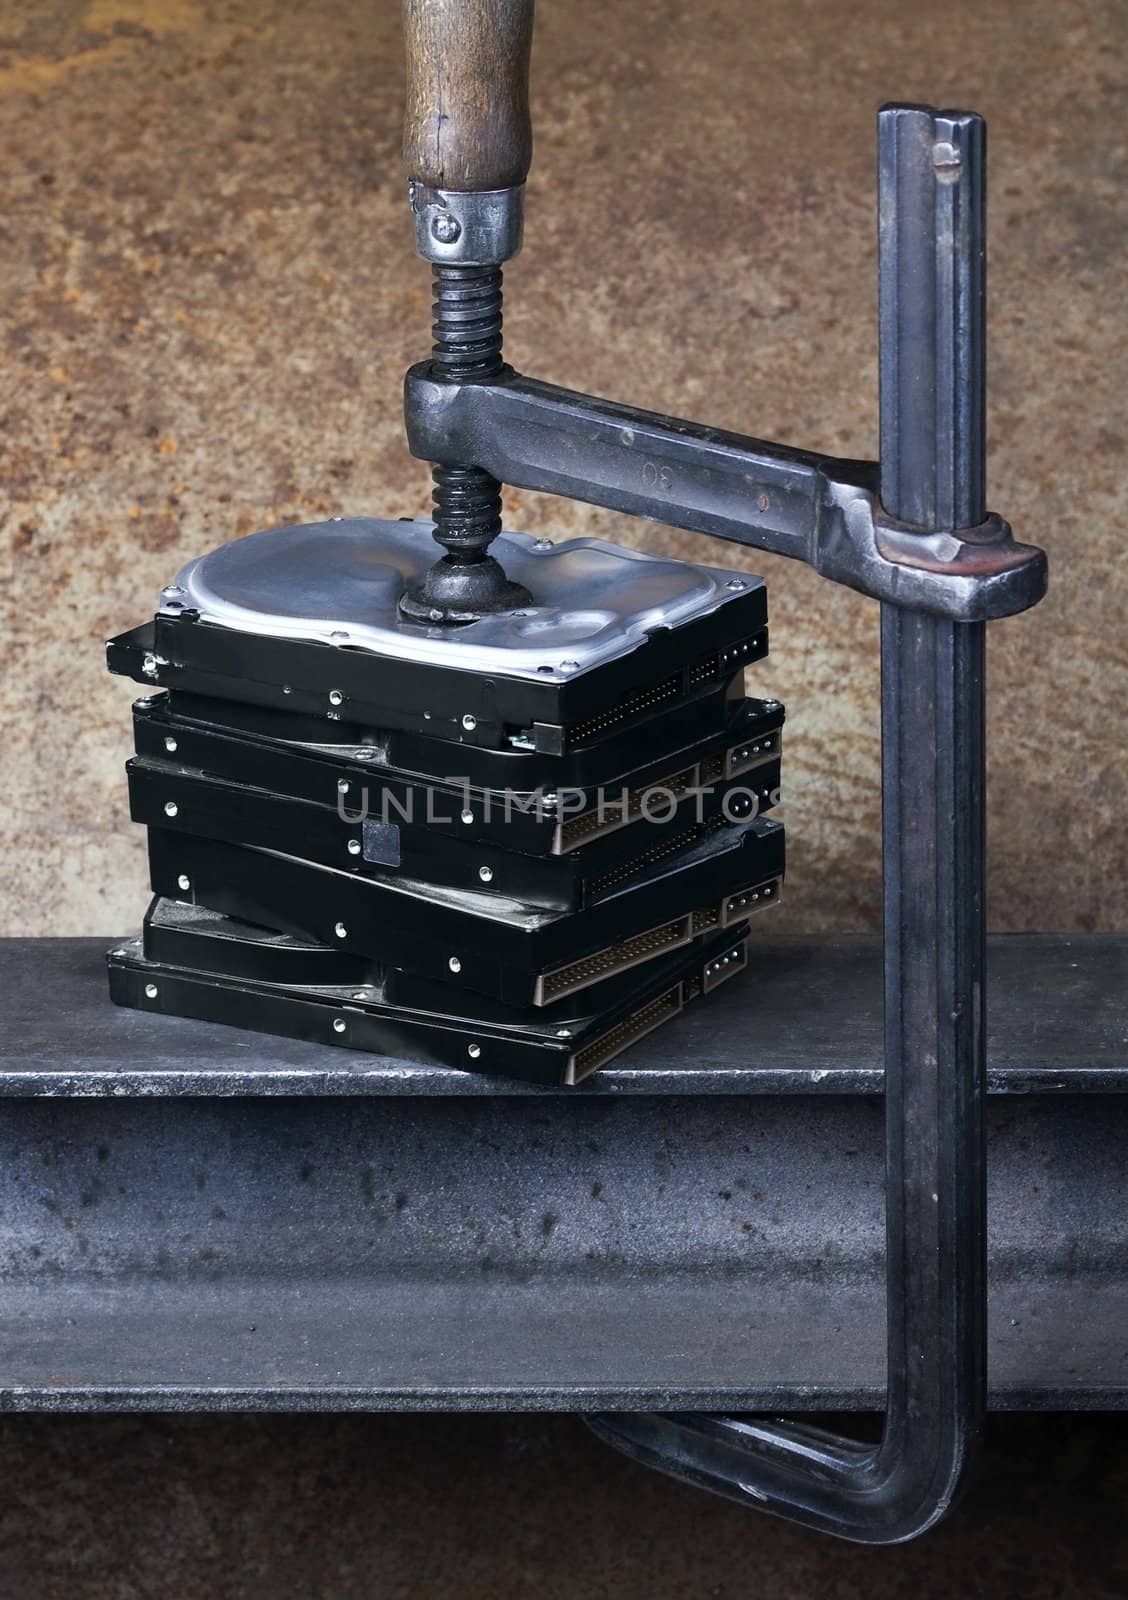 heavy screw clamp giving pressure to several hard drives. Studio shot taken in front of rusty background